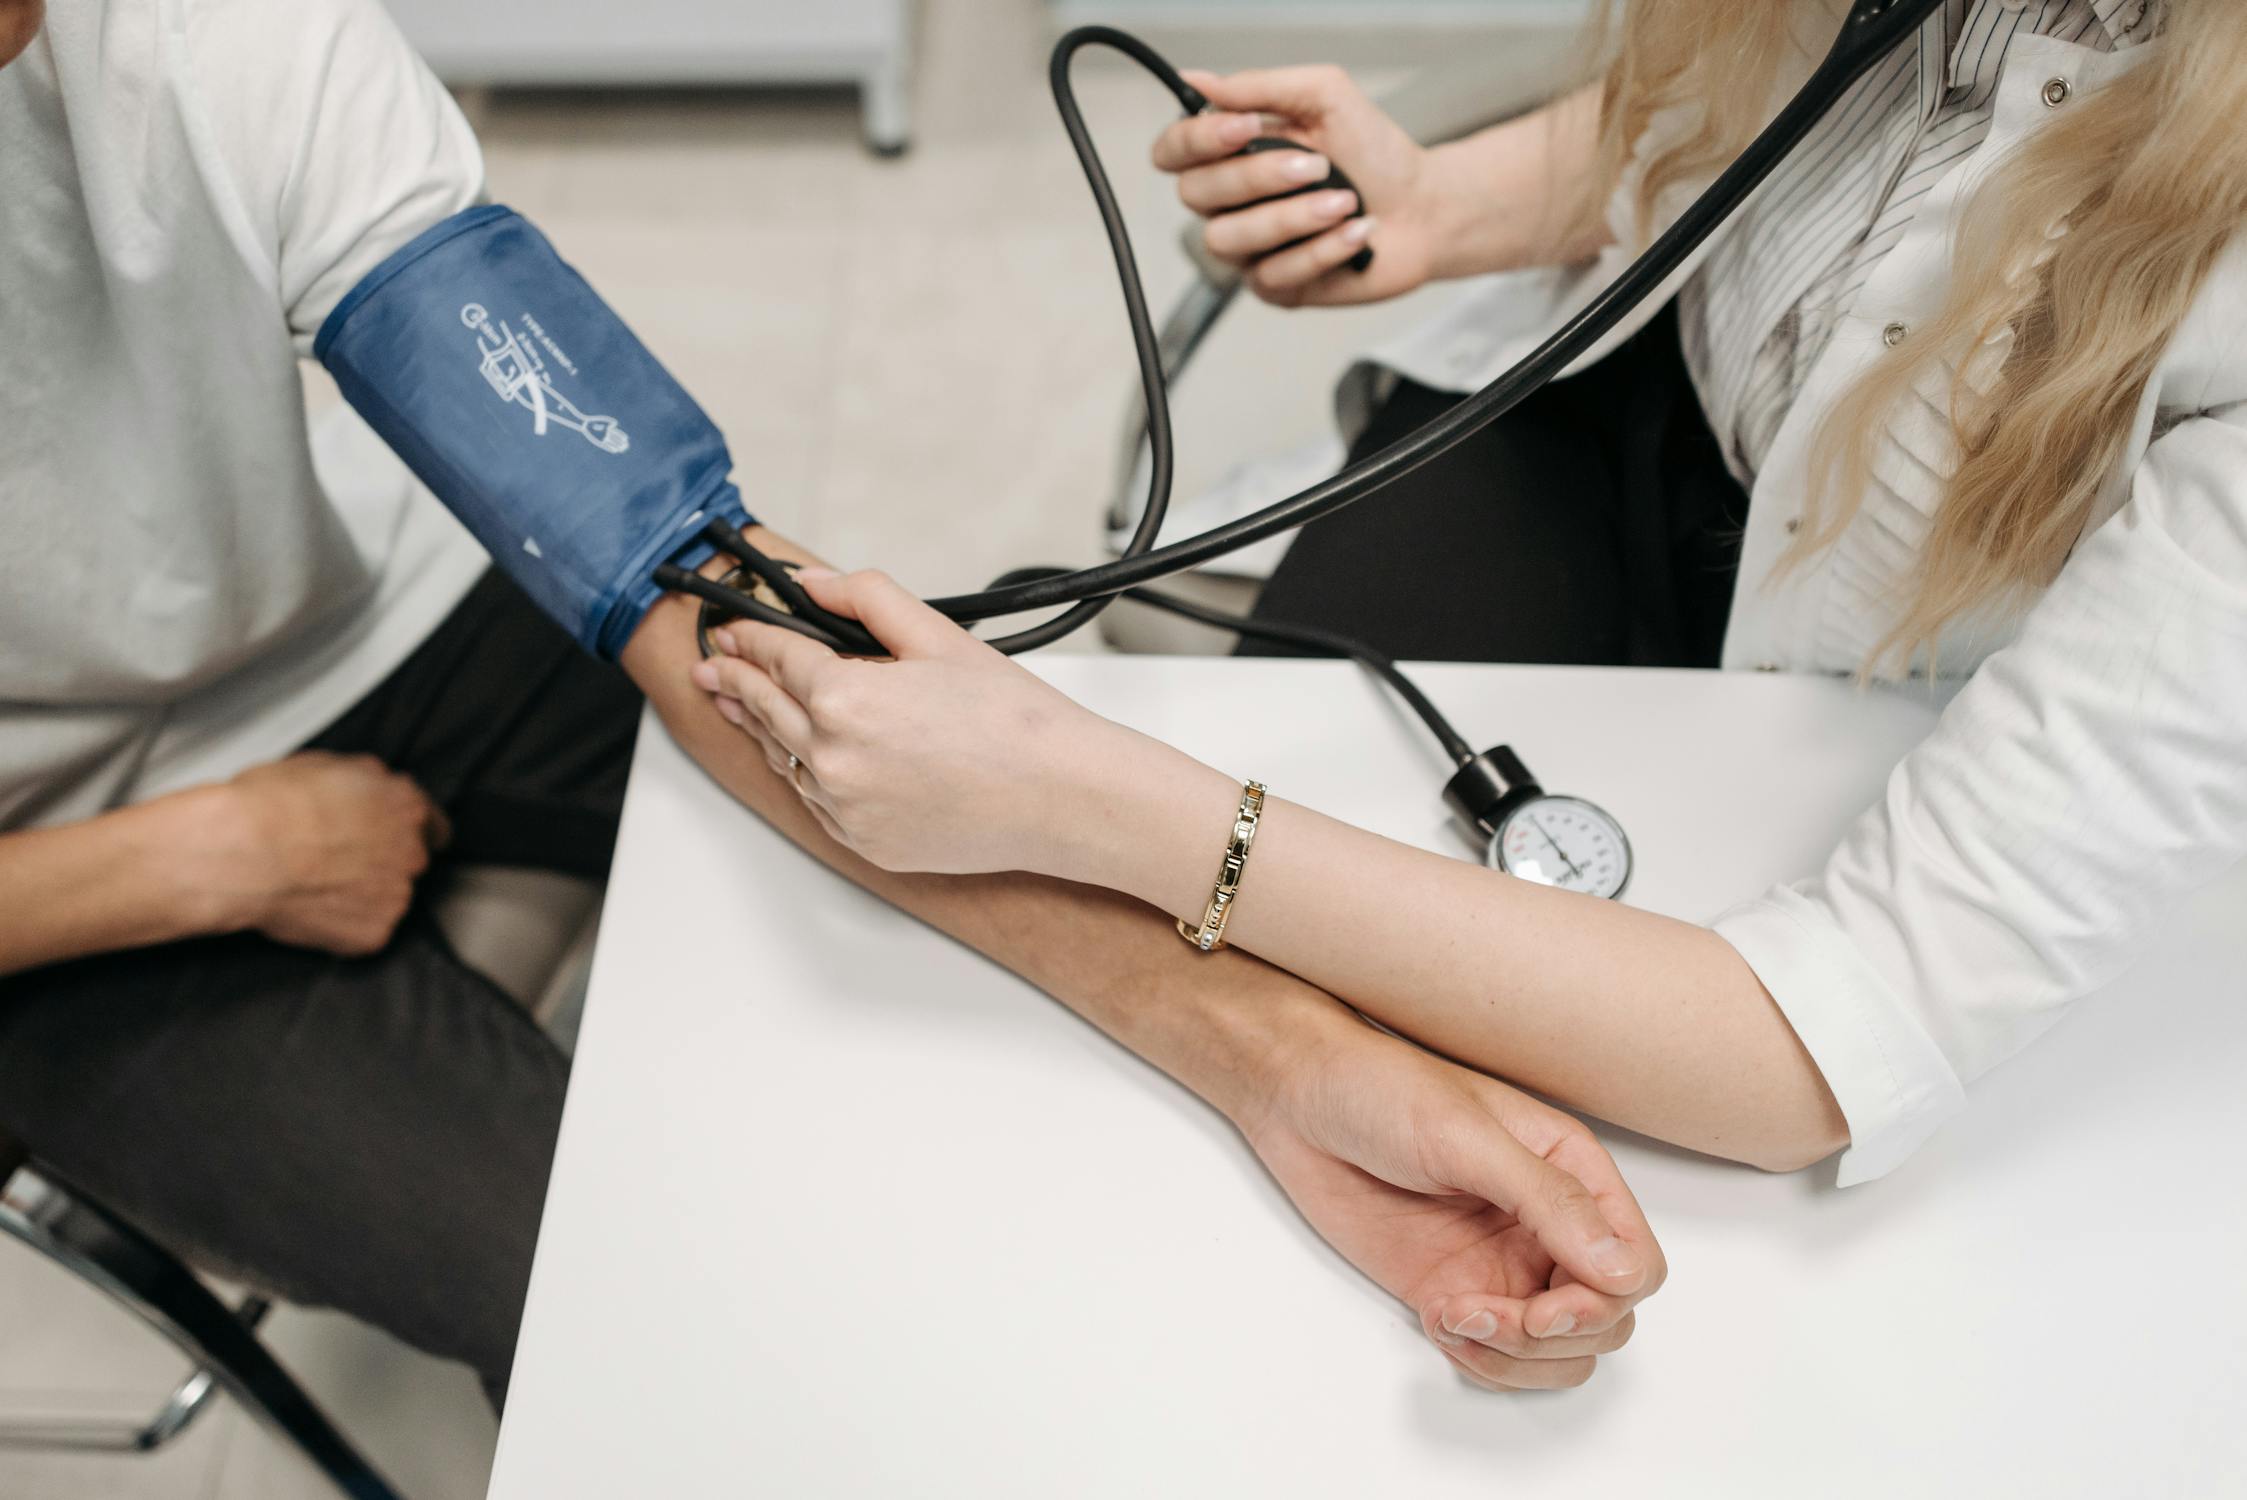 Blood Pressure Photo by Pavel Danilyuk from Pexels: https://www.pexels.com/photo/a-healthcare-worker-measuring-a-patient-s-blood-pressure-using-a-sphygmomanometer-7108344/